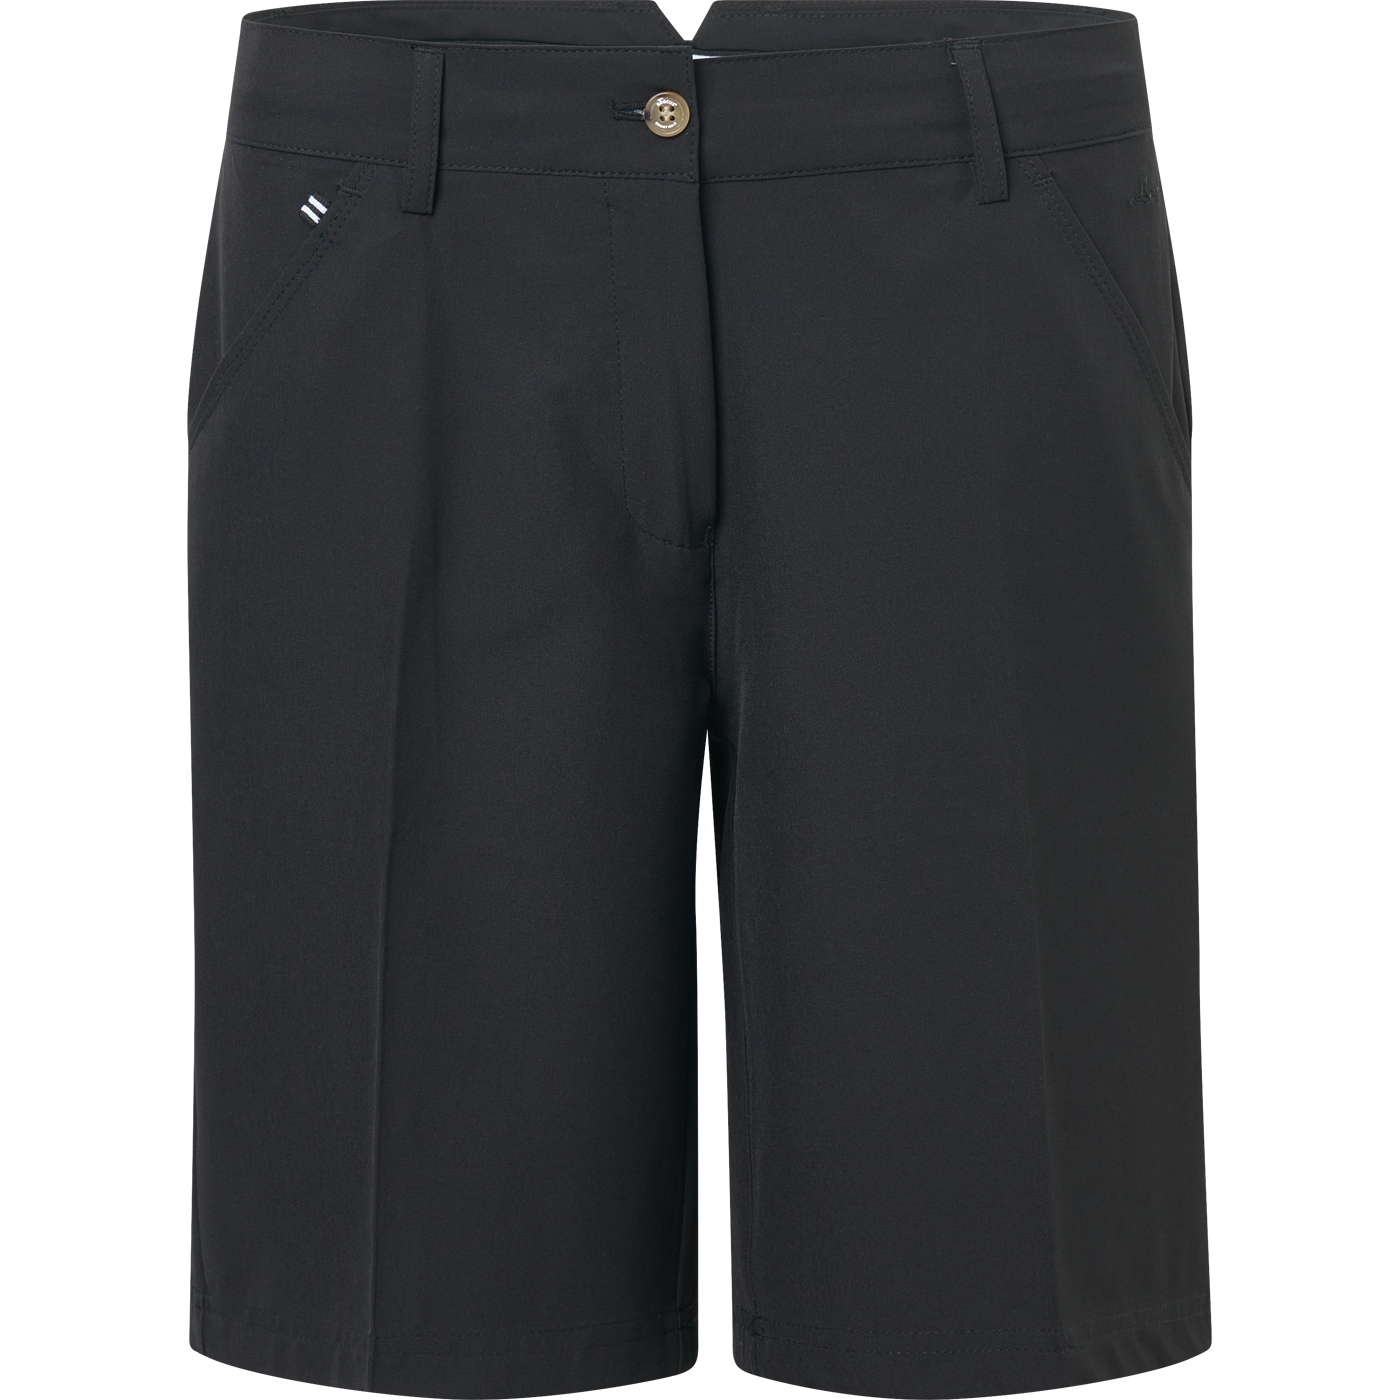 Lds Kildare shorts - black in the group WOMEN / All clothing at Abacus Sportswear (2981600)